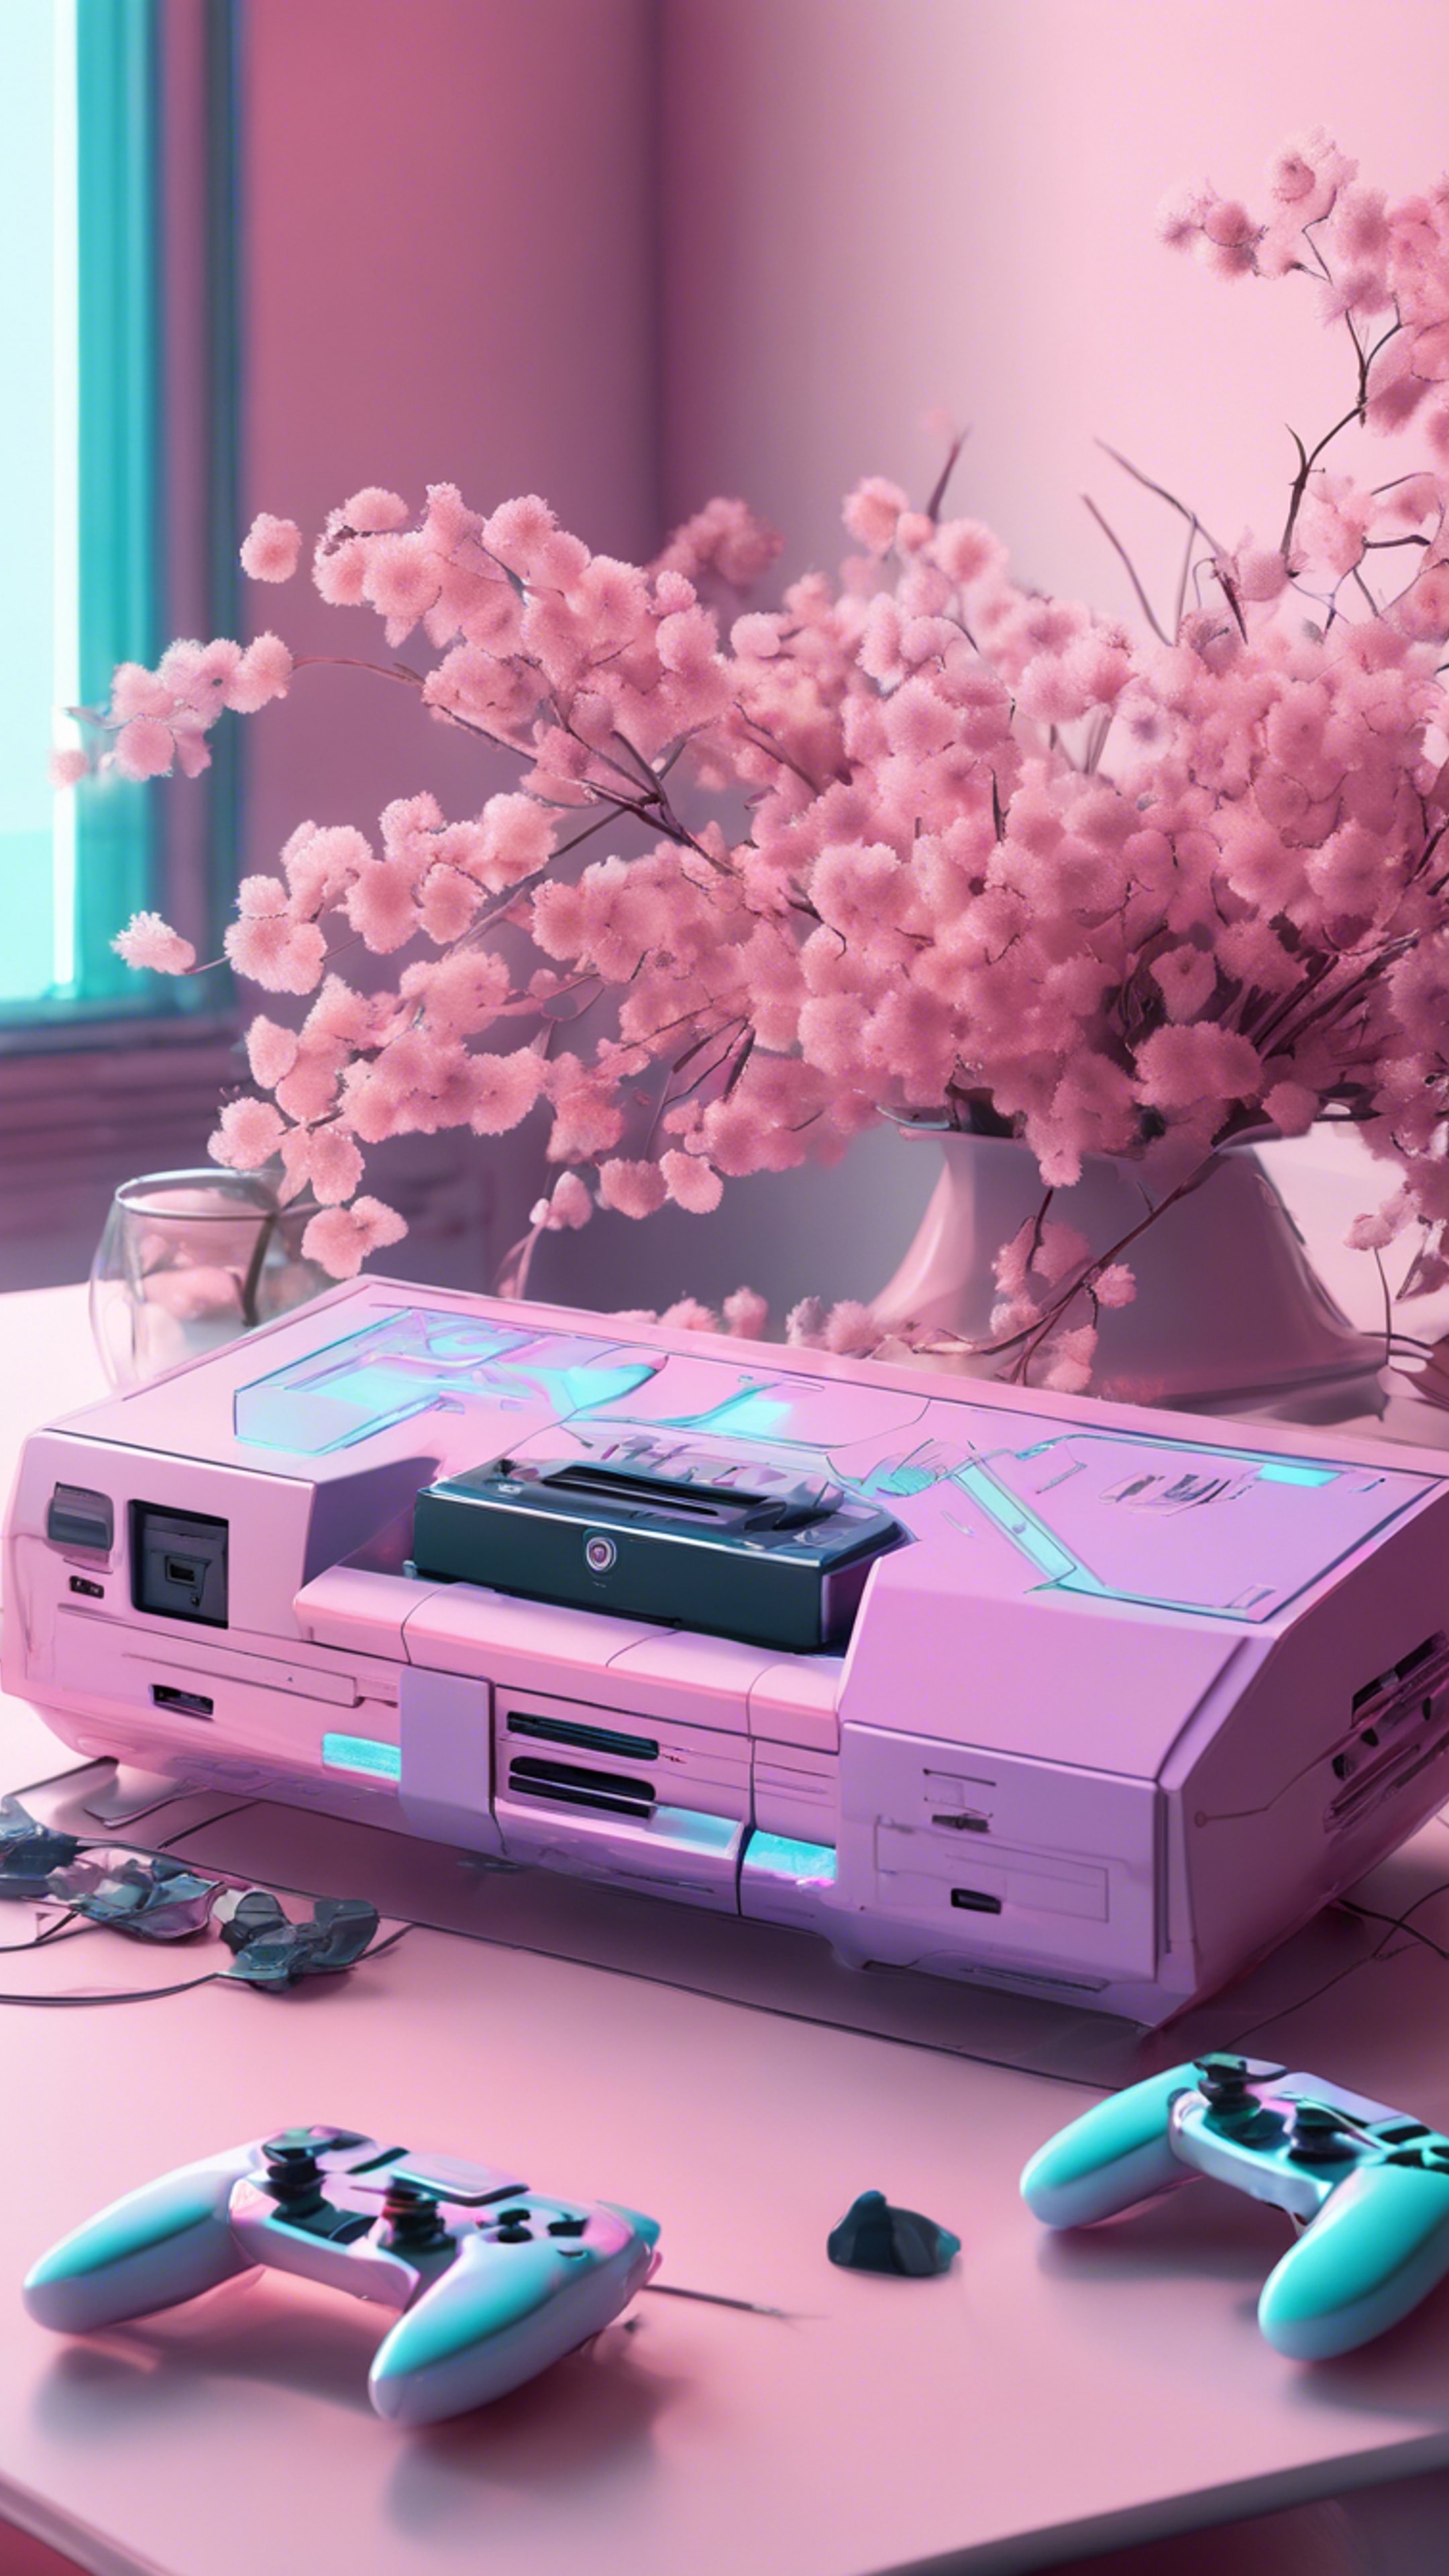 A pastel colored gaming console on a white table next to soft colored flowers in a daylight room. Ταπετσαρία[43bf14bcce304acdbb24]